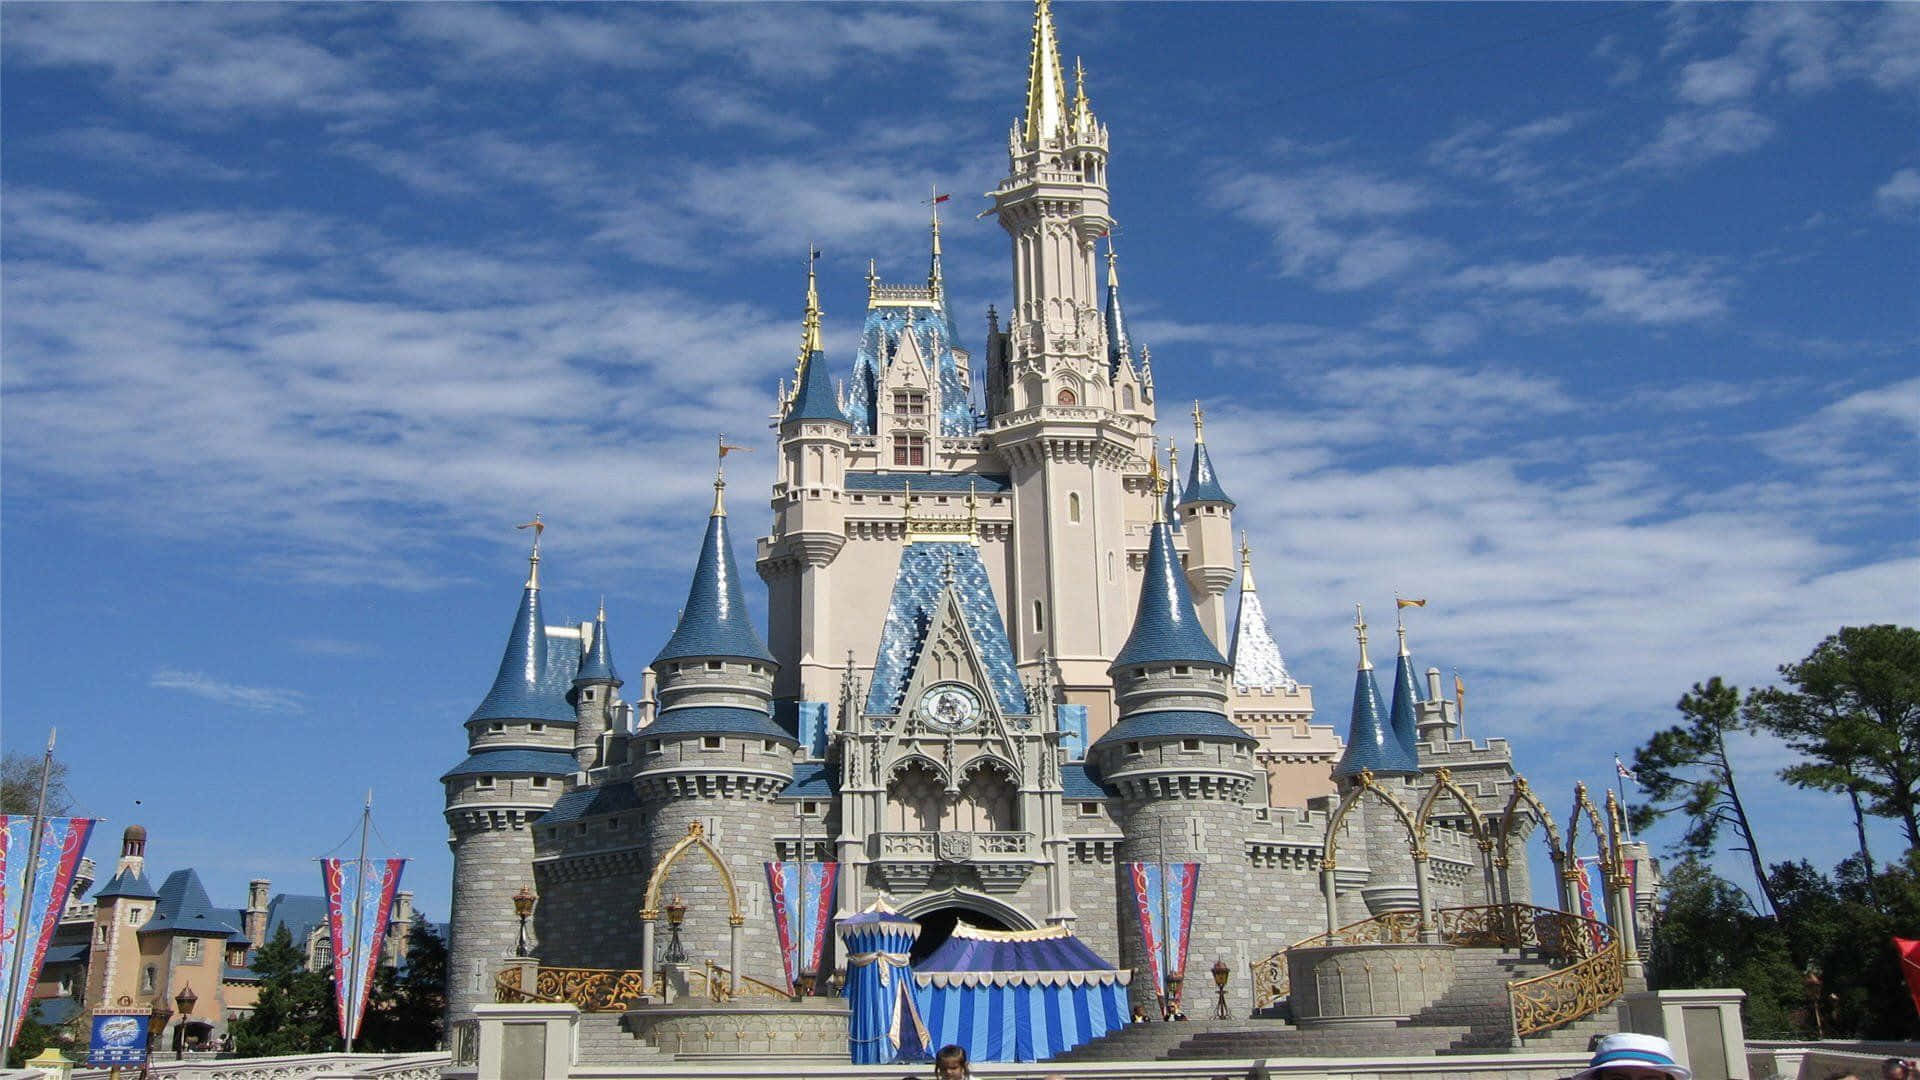 “Experience a Magical World Inside the Iconic Disney Castle!”